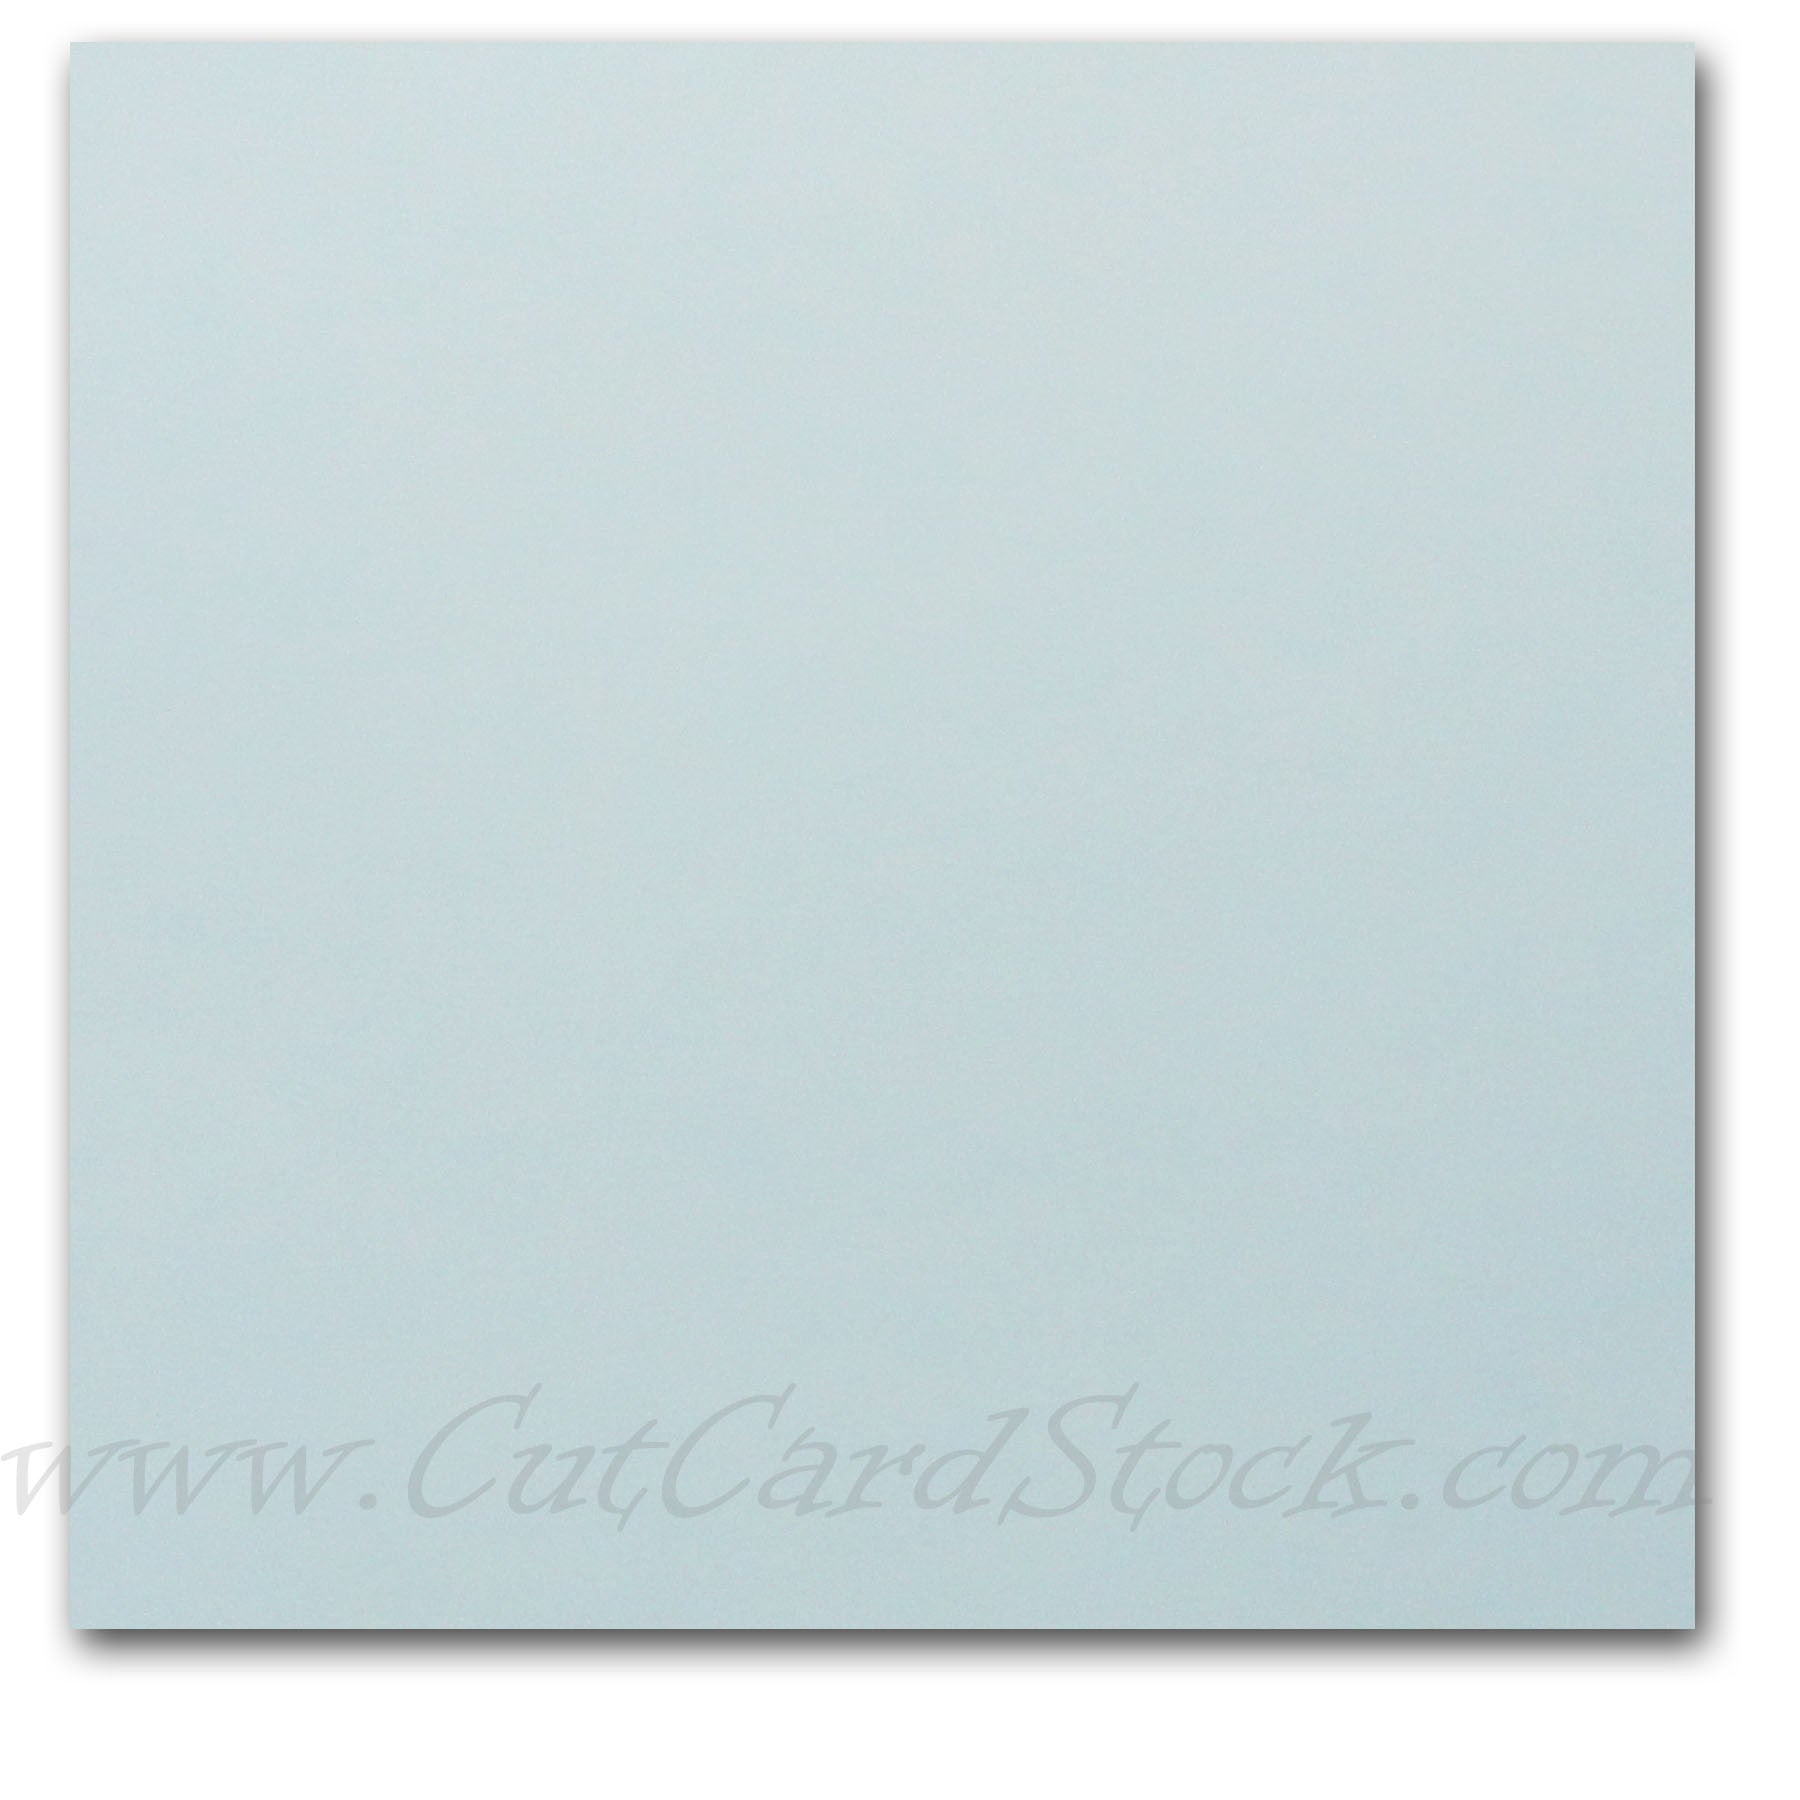 Springhill Index Card Stock for brochures, flyers and post cards -  CutCardStock